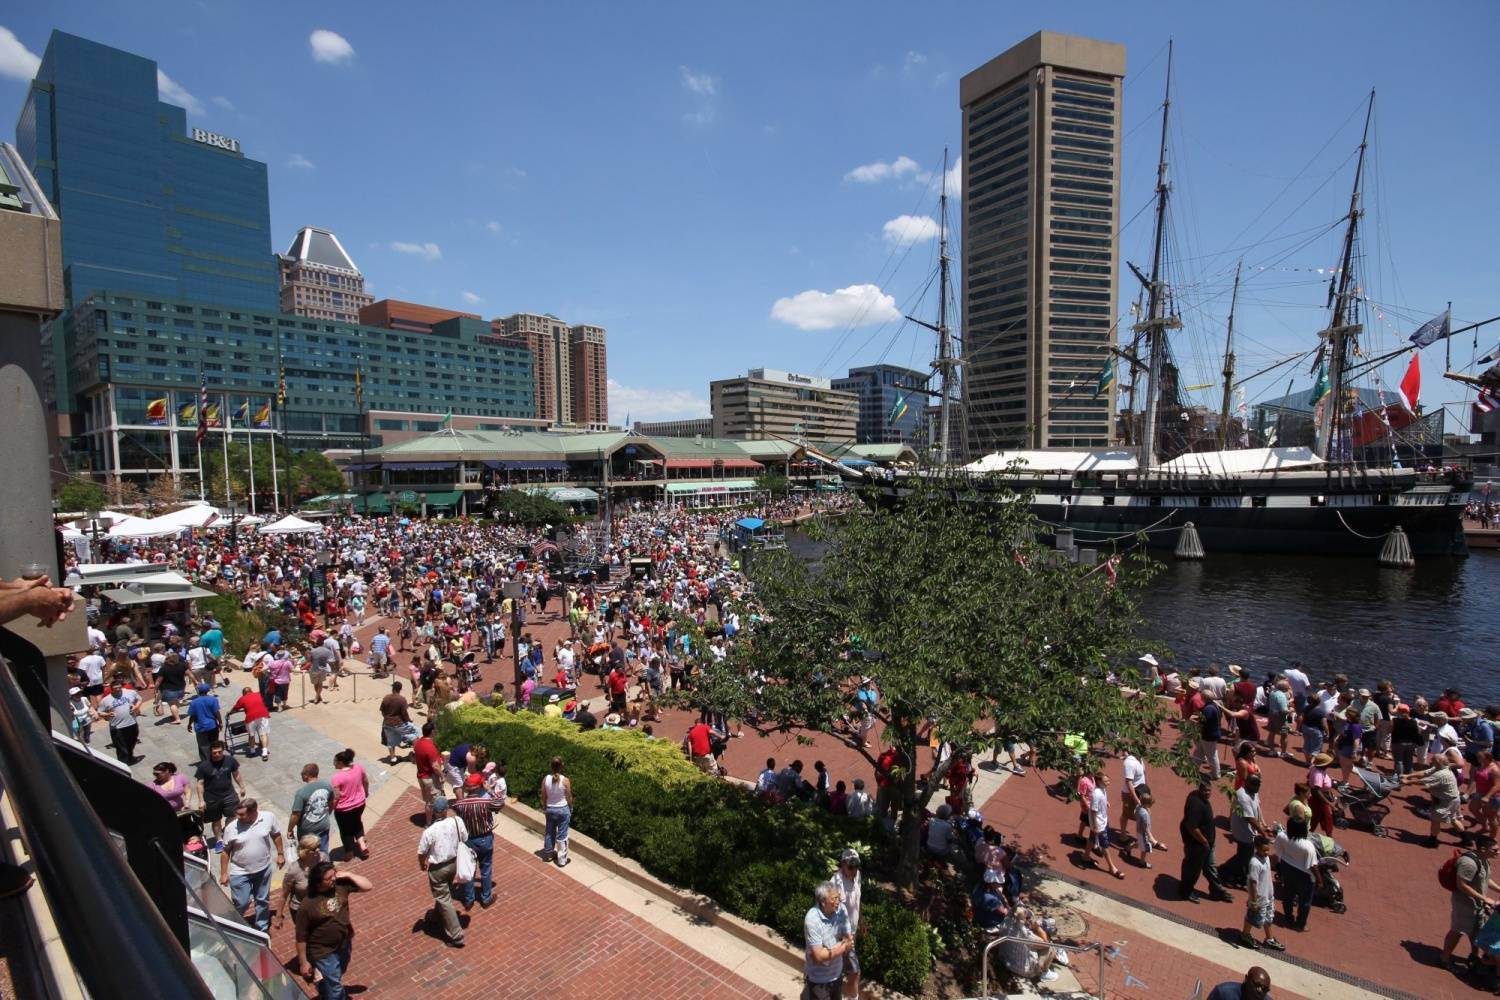 Is baltimore inner harbor safe at night?